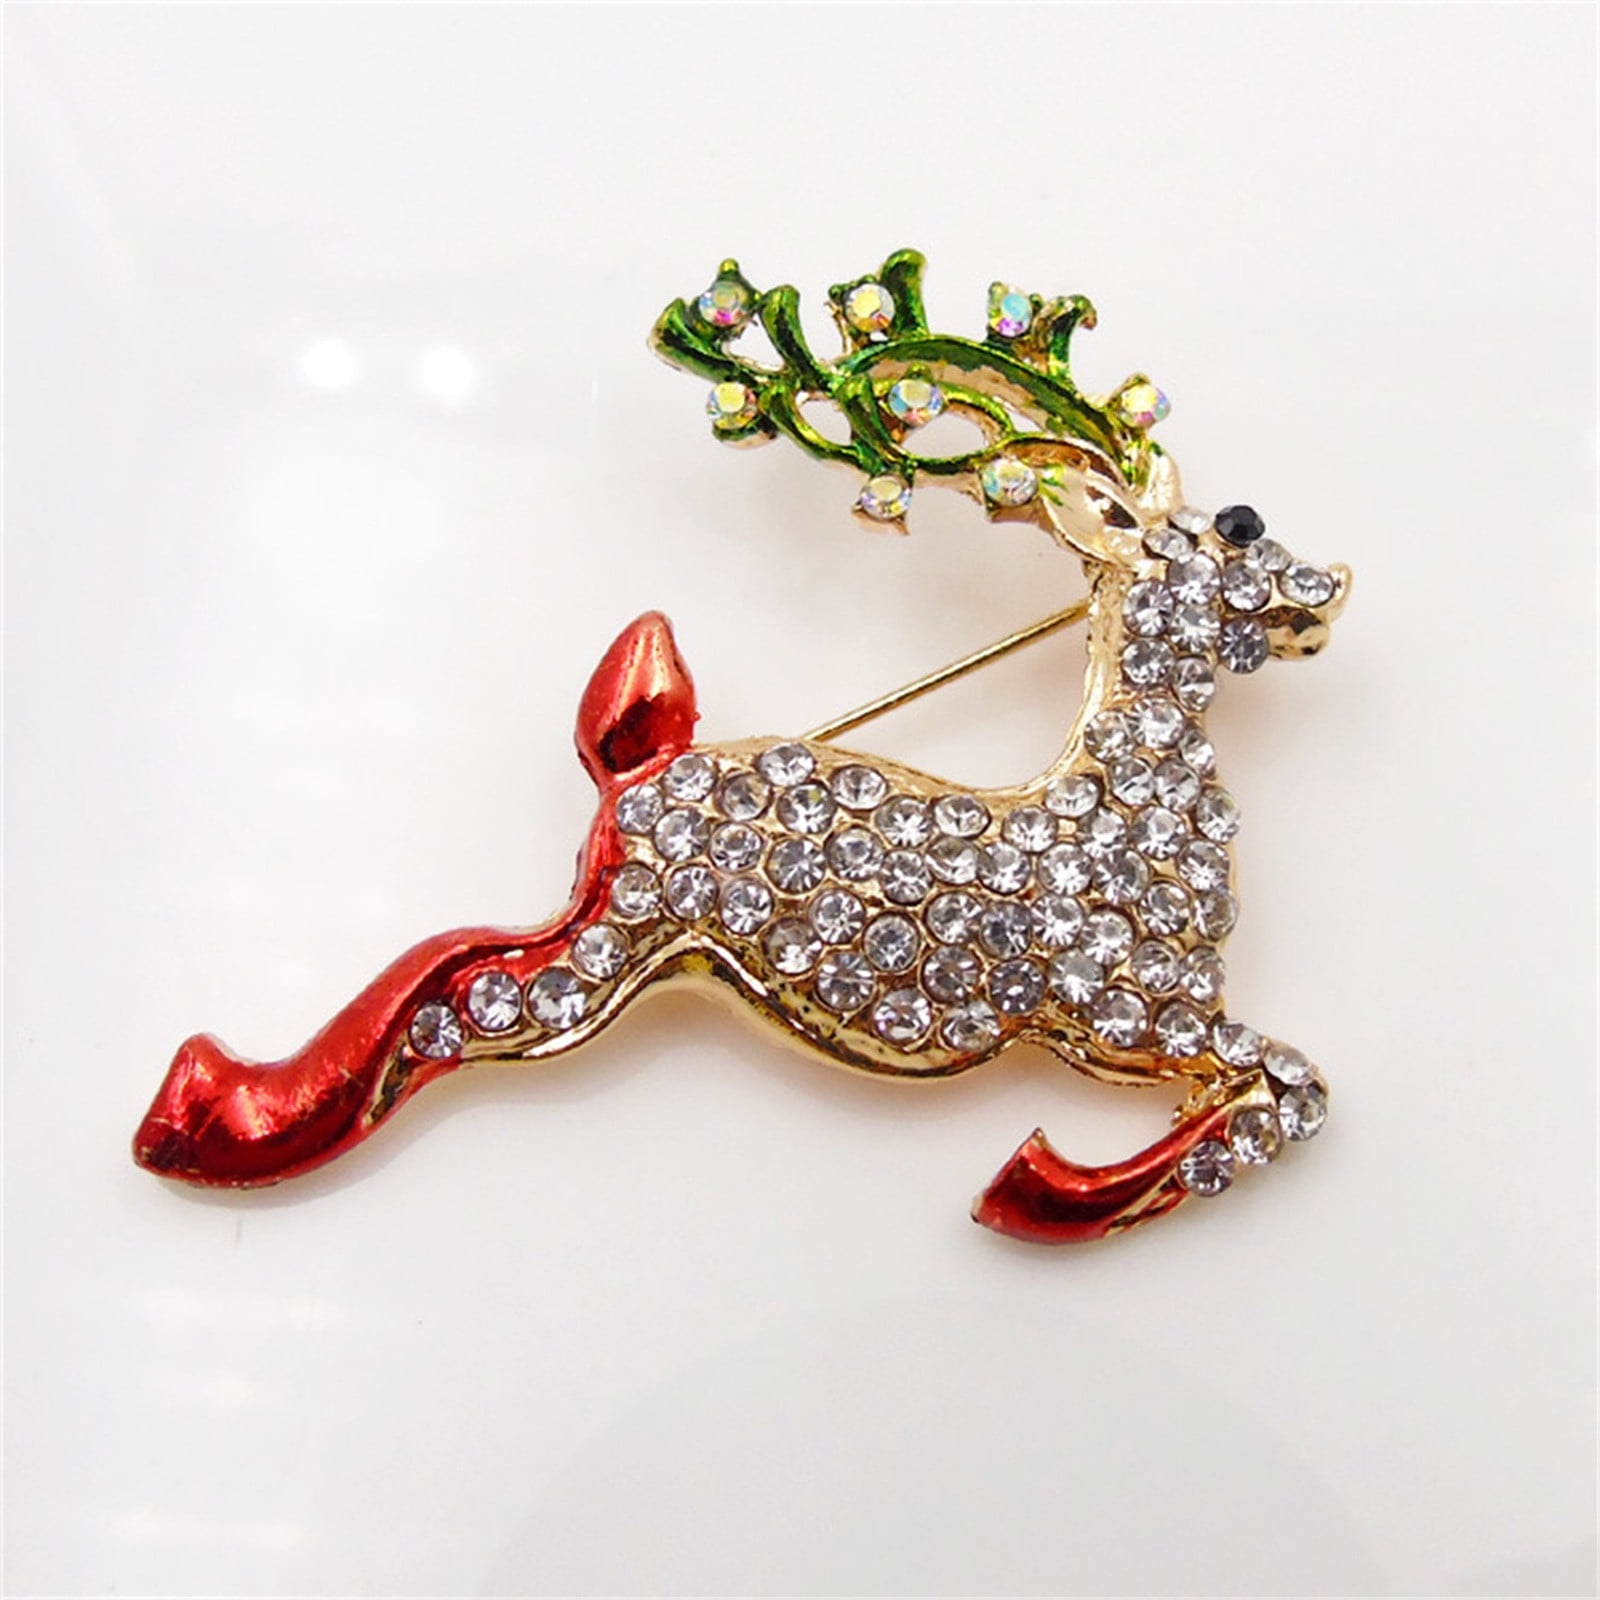 Mortilo Jewelry Brooch Pin Set Rhinestone Christmas Style Pins Snowman Bells Christmas Trees Jewelry Pins for Xmas Decorations Brooch Pins Resin G, Women's